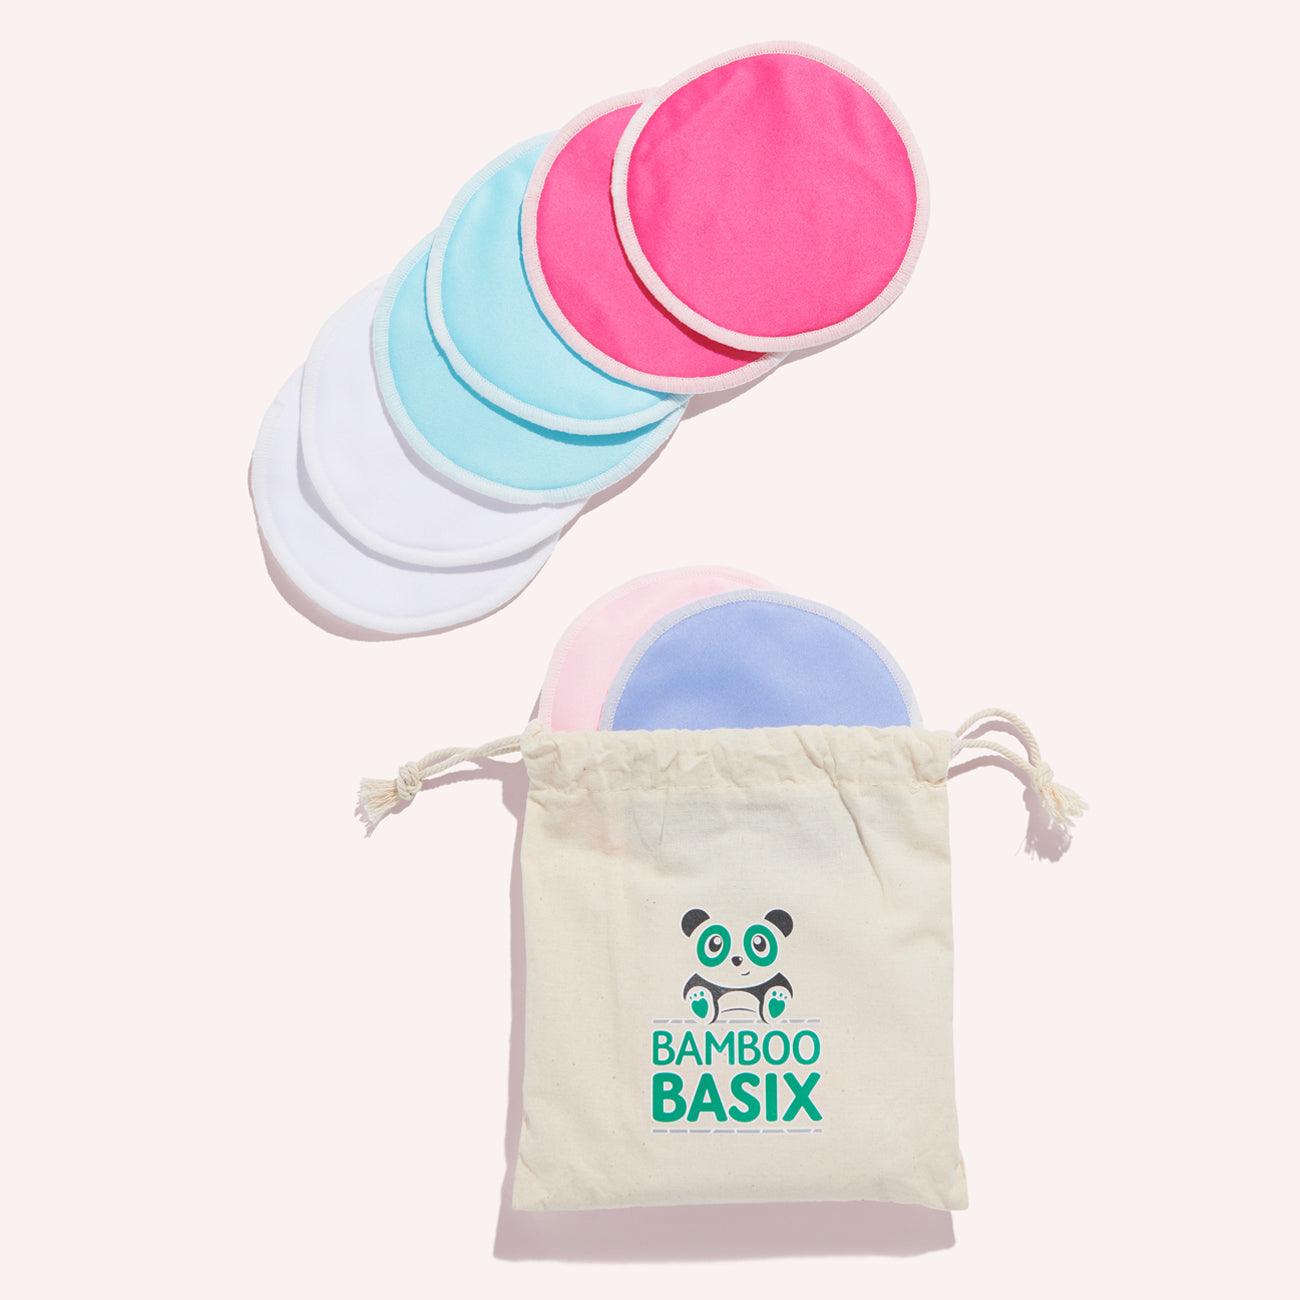 Baby Works Bamboo Reusable Nursing Pads With Wet Bag & Laundry Bag - 8